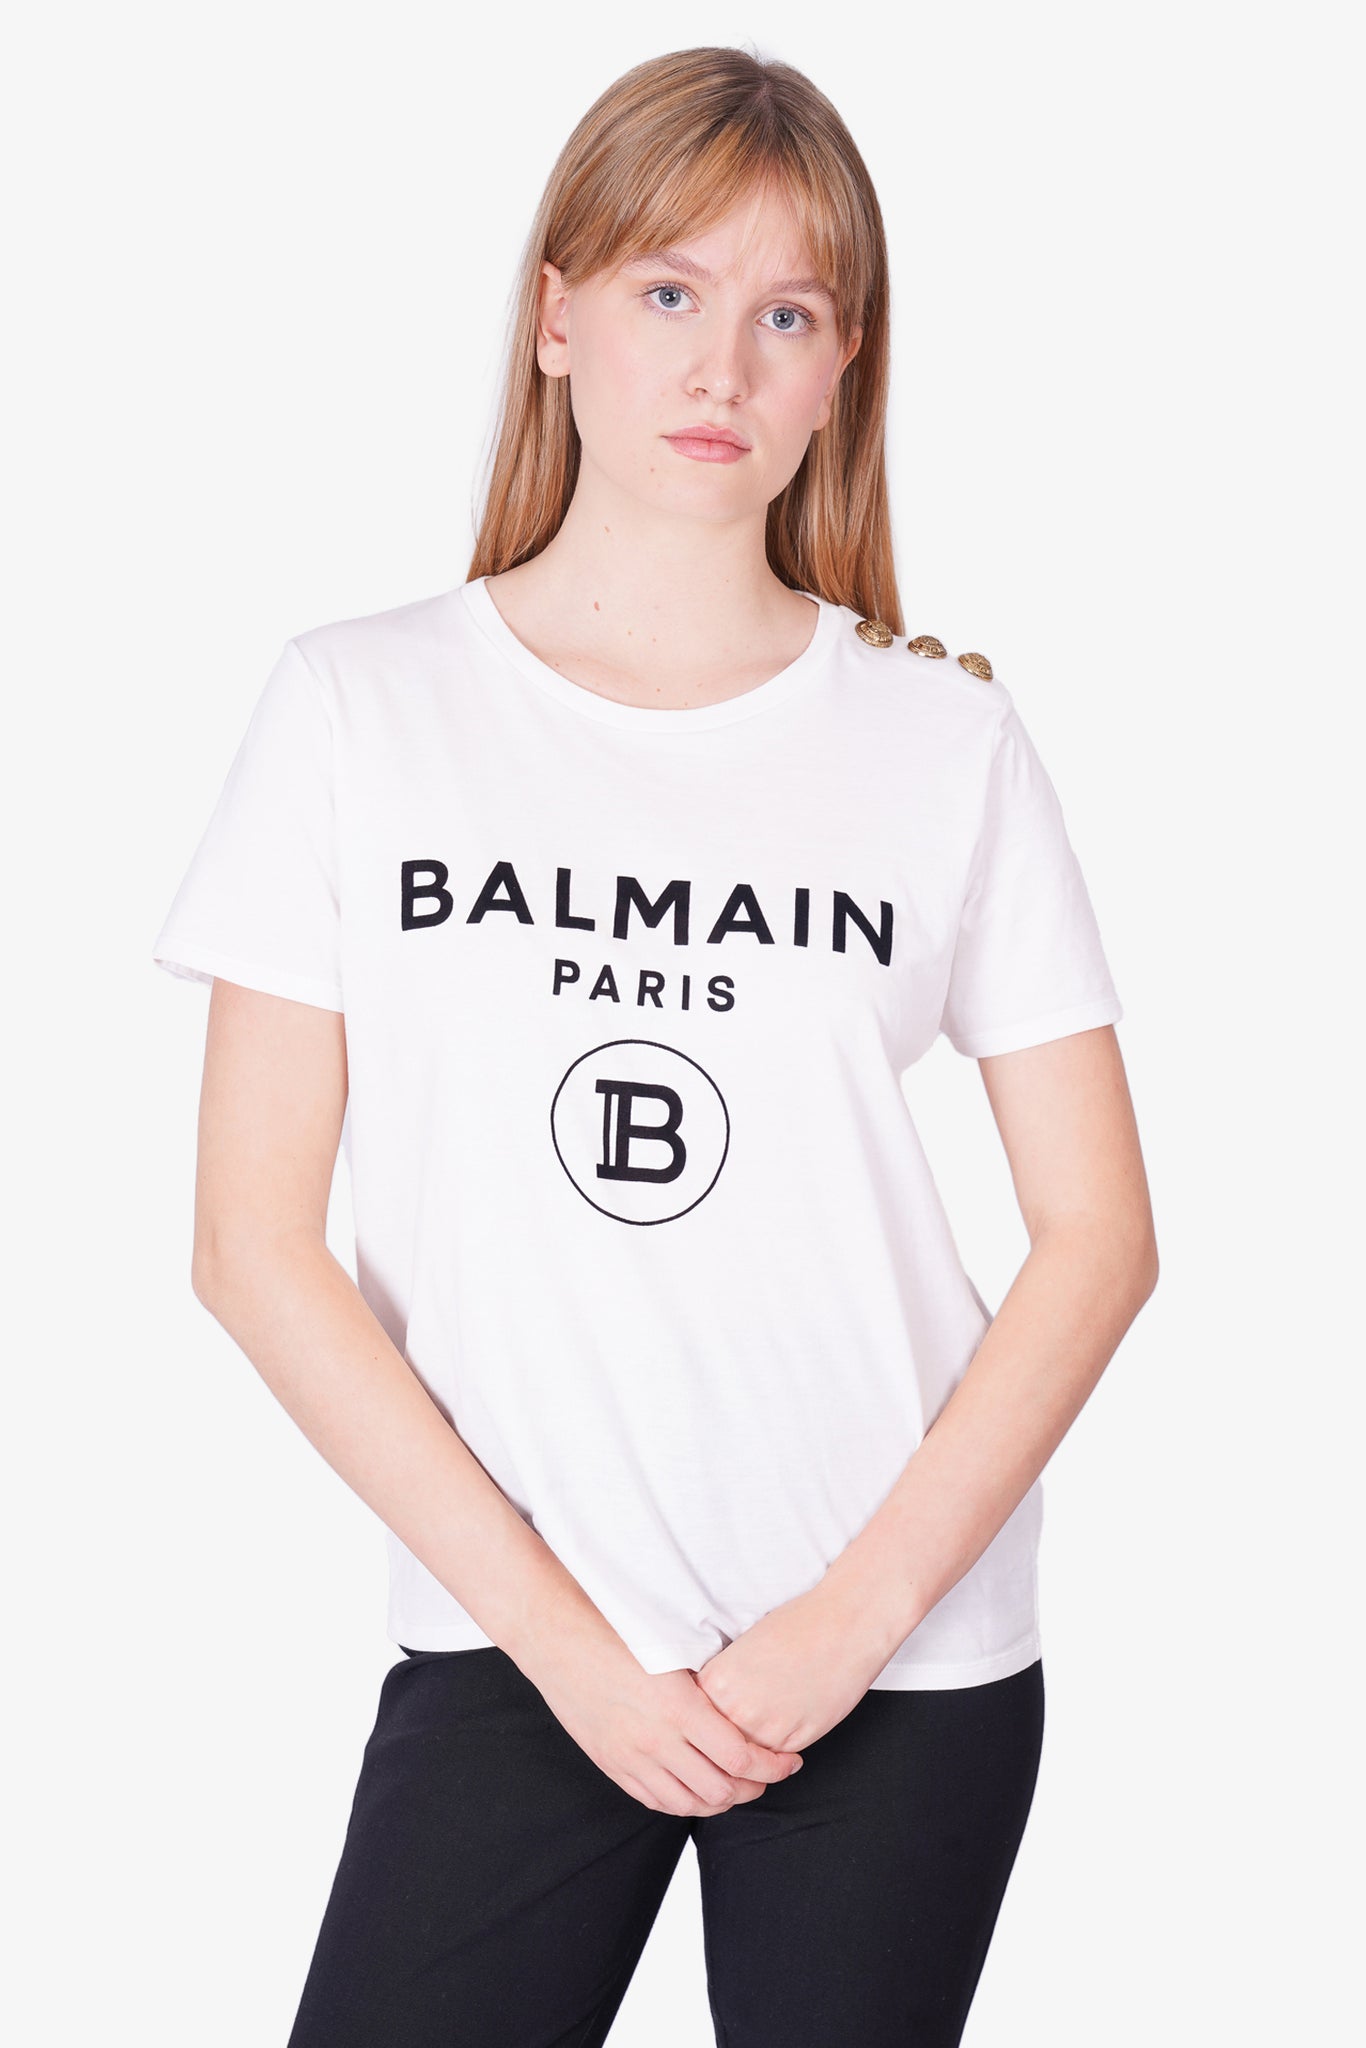 Balmain White Cotton T-Shirt With Logo and Gold Buttons Size M